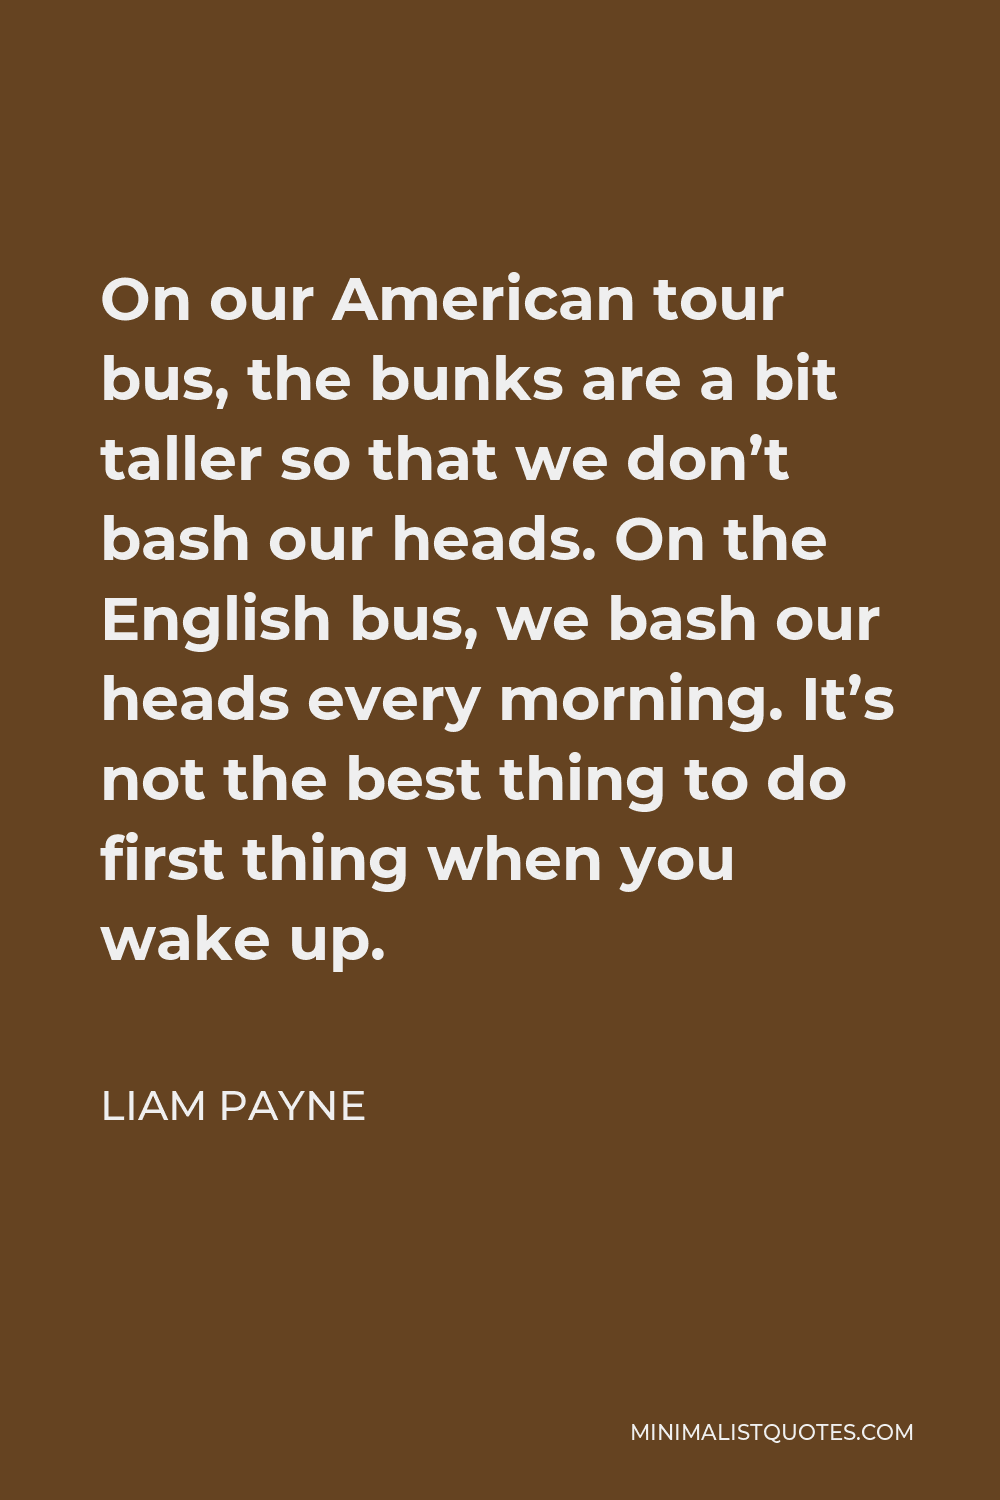 Liam Payne Quote - On our American tour bus, the bunks are a bit taller so that we don’t bash our heads. On the English bus, we bash our heads every morning. It’s not the best thing to do first thing when you wake up.